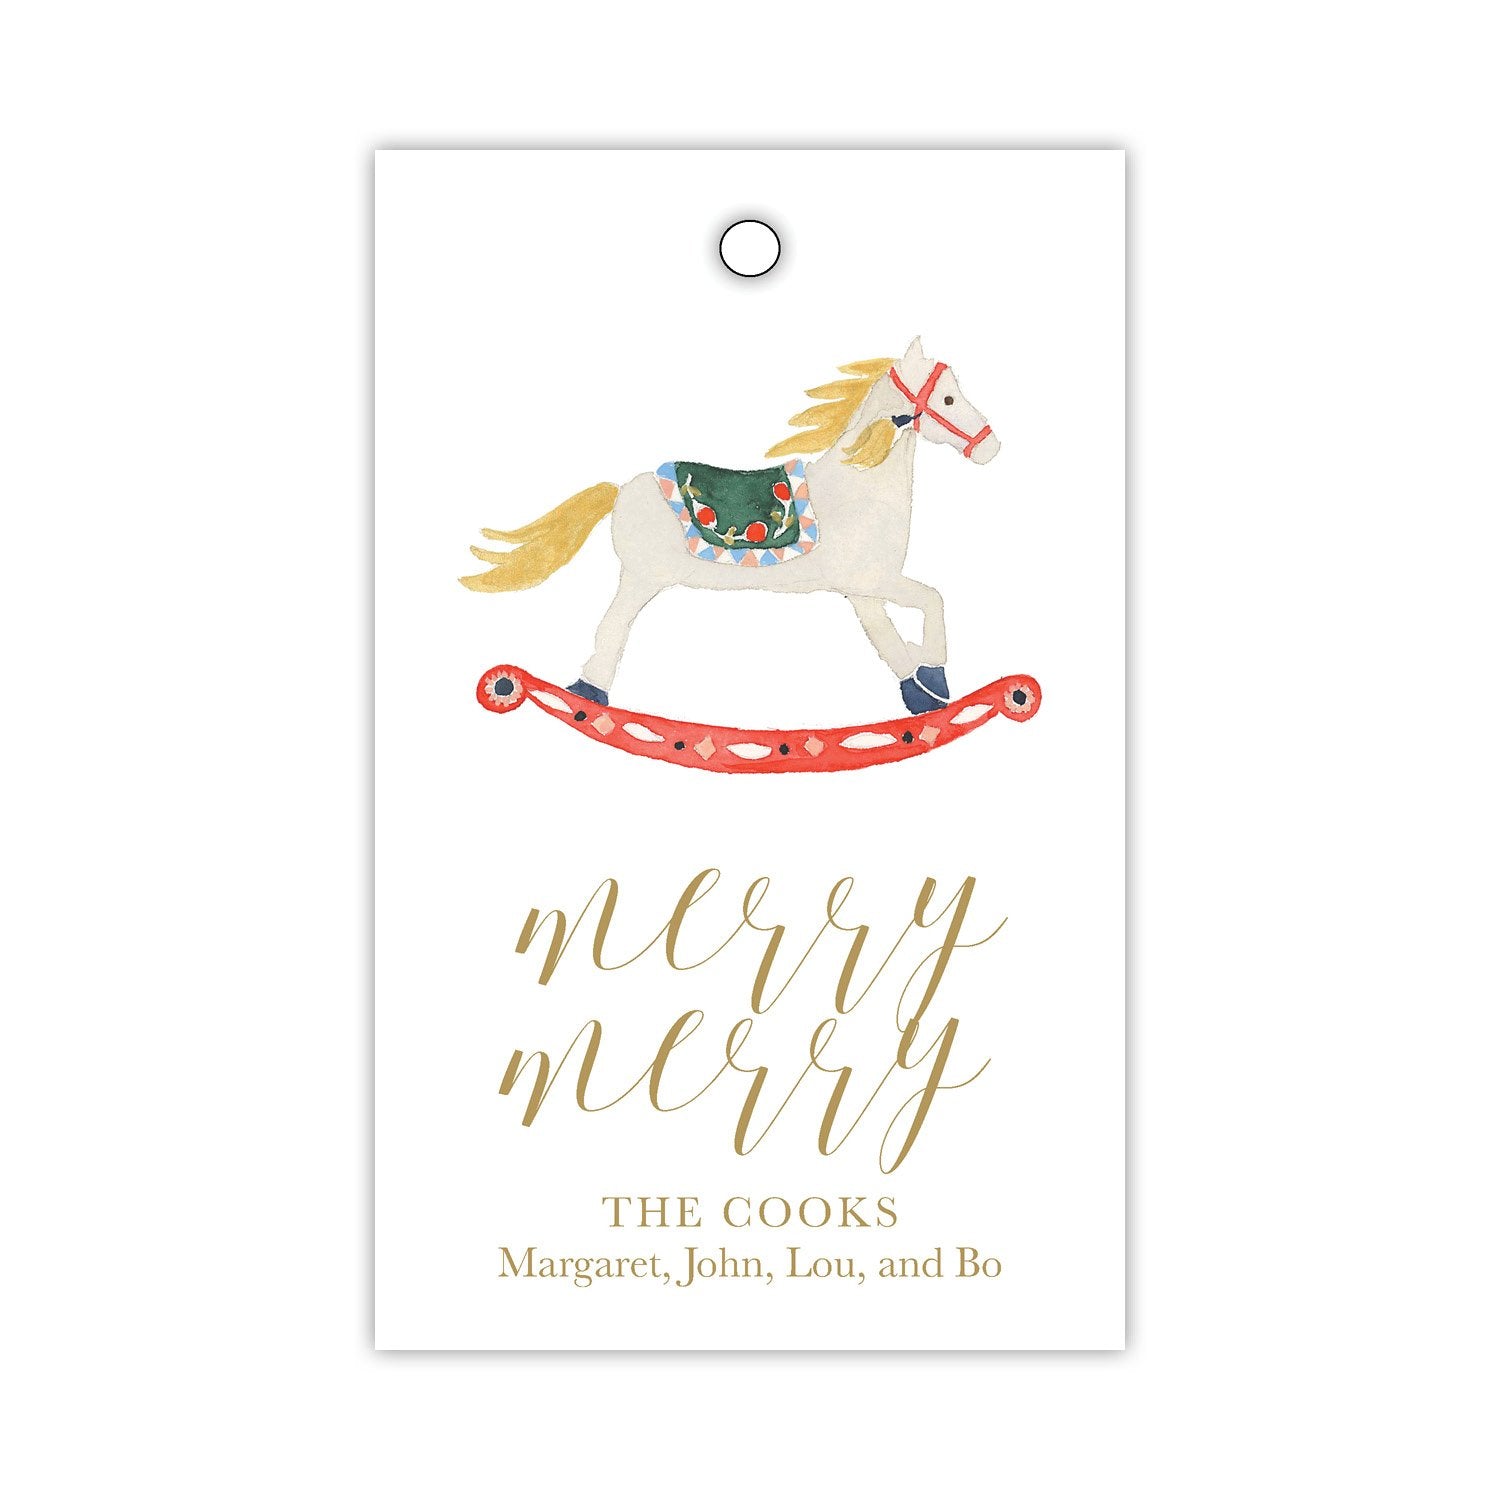 Merry Rocking Horse Gift Tags